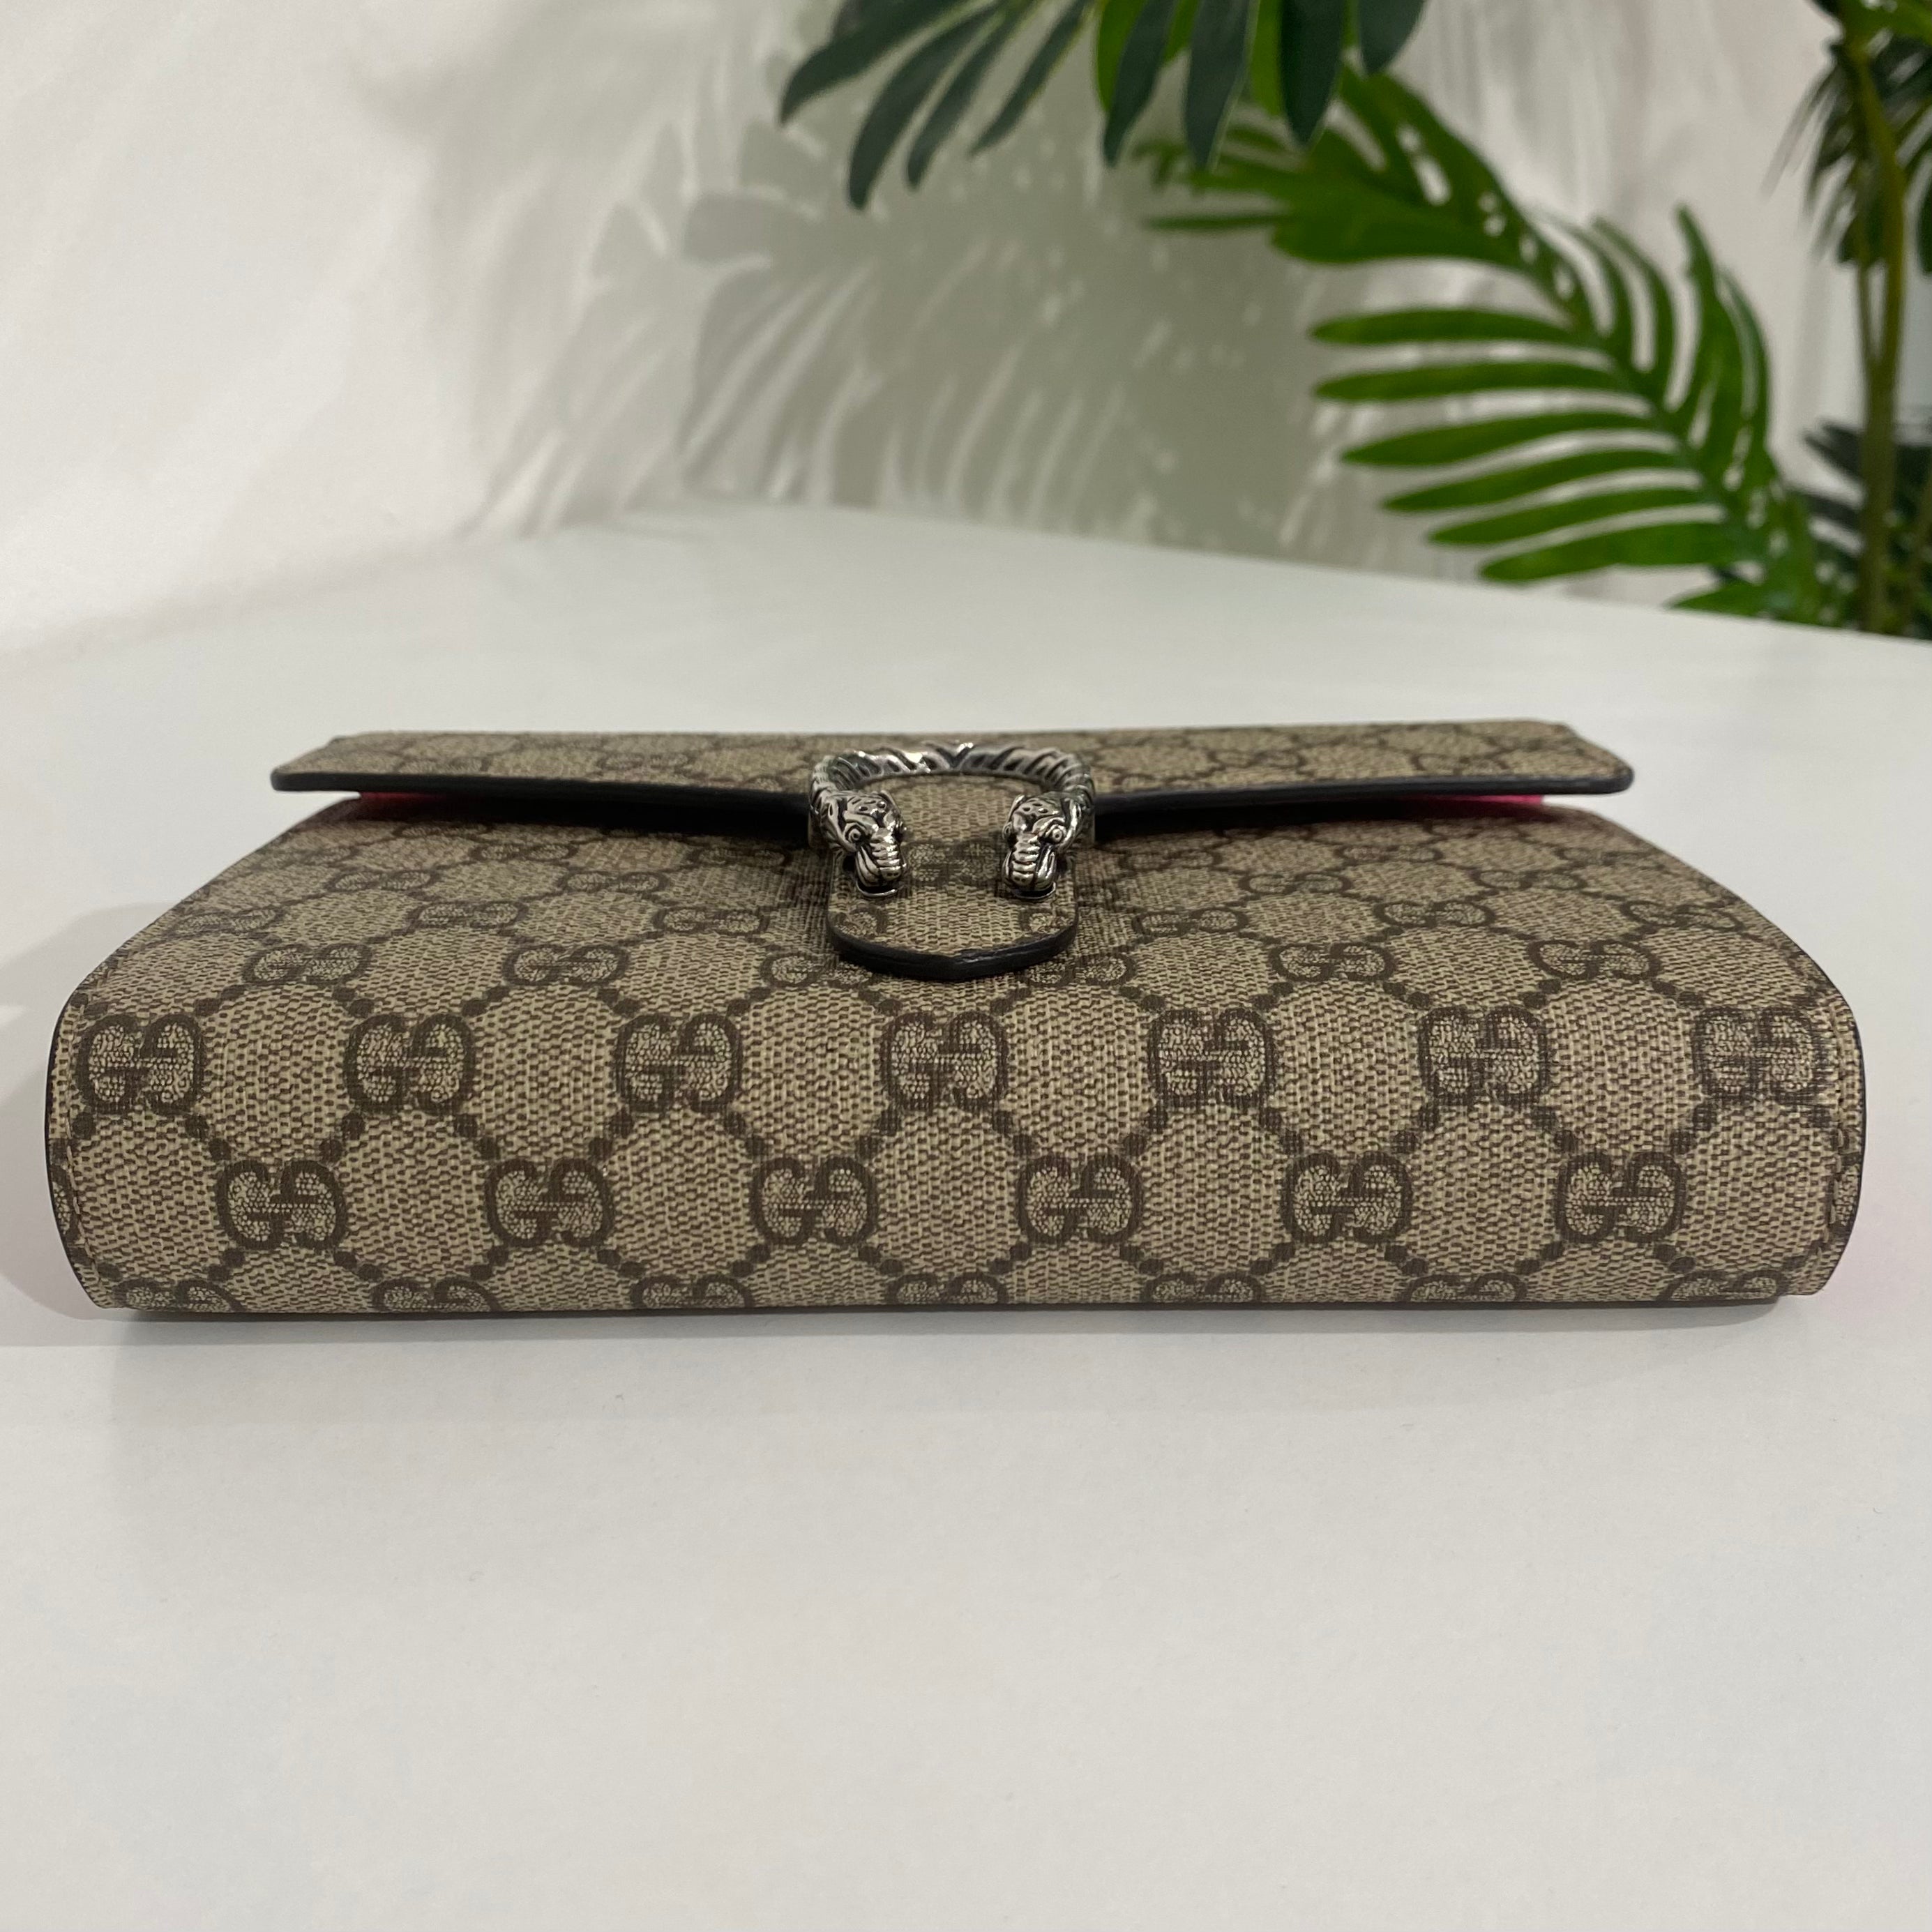 Shop GUCCI Dionysus Monogram Blended Fabrics 2WAY Other Animal Patterns  Leather (476432 CAOGN 8176) by UK-Direct